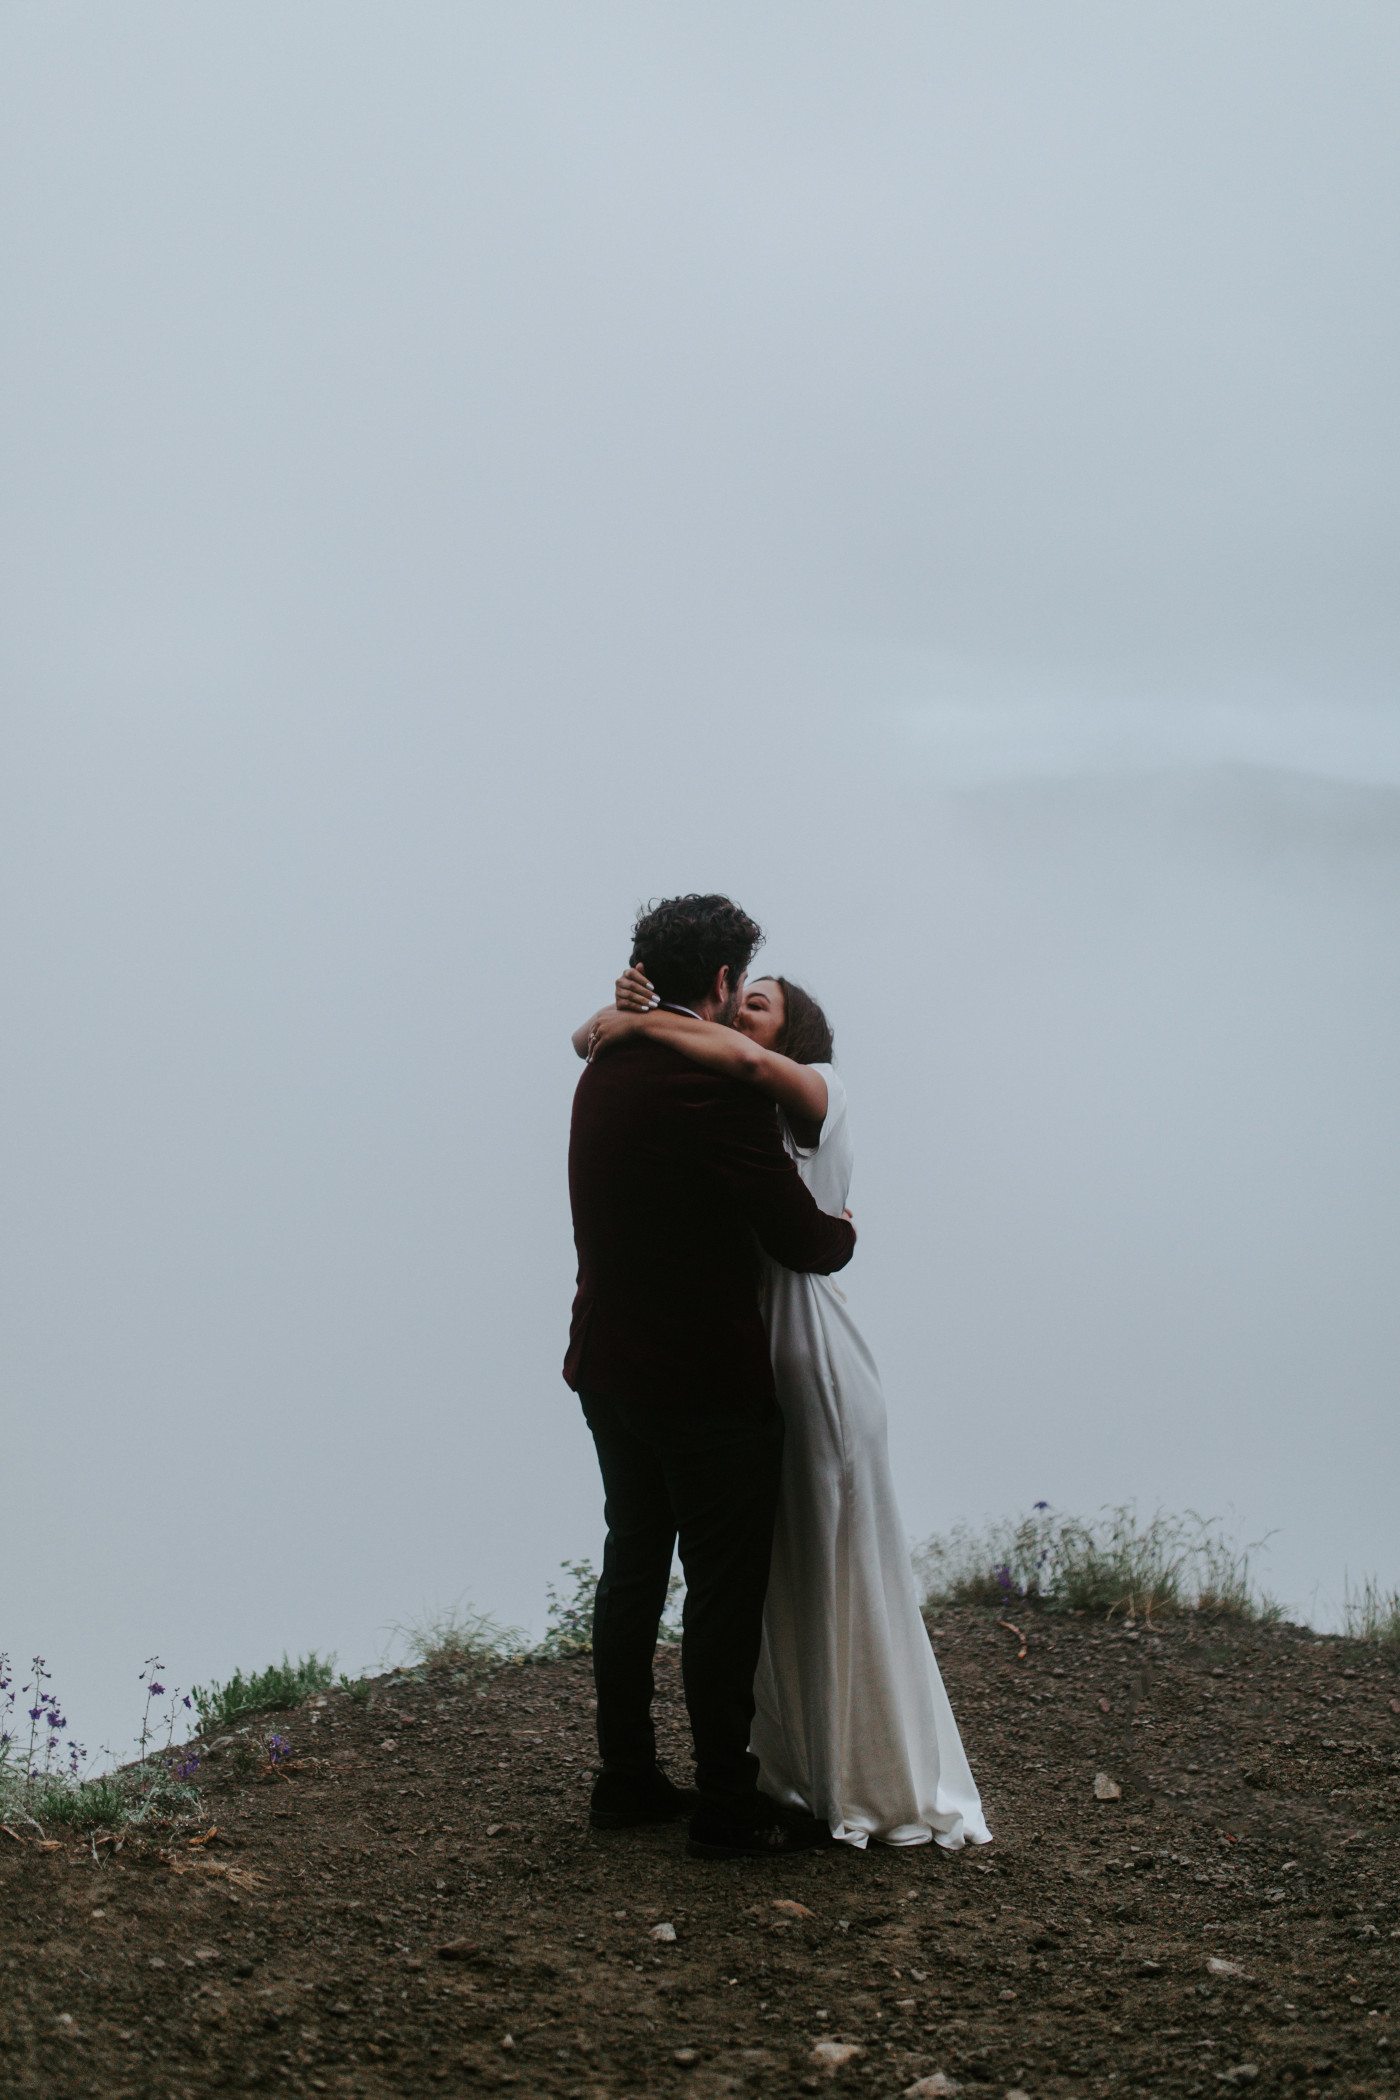 Katelyn and Murray kiss. Elopement wedding photography at Mount Hood by Sienna Plus Josh.